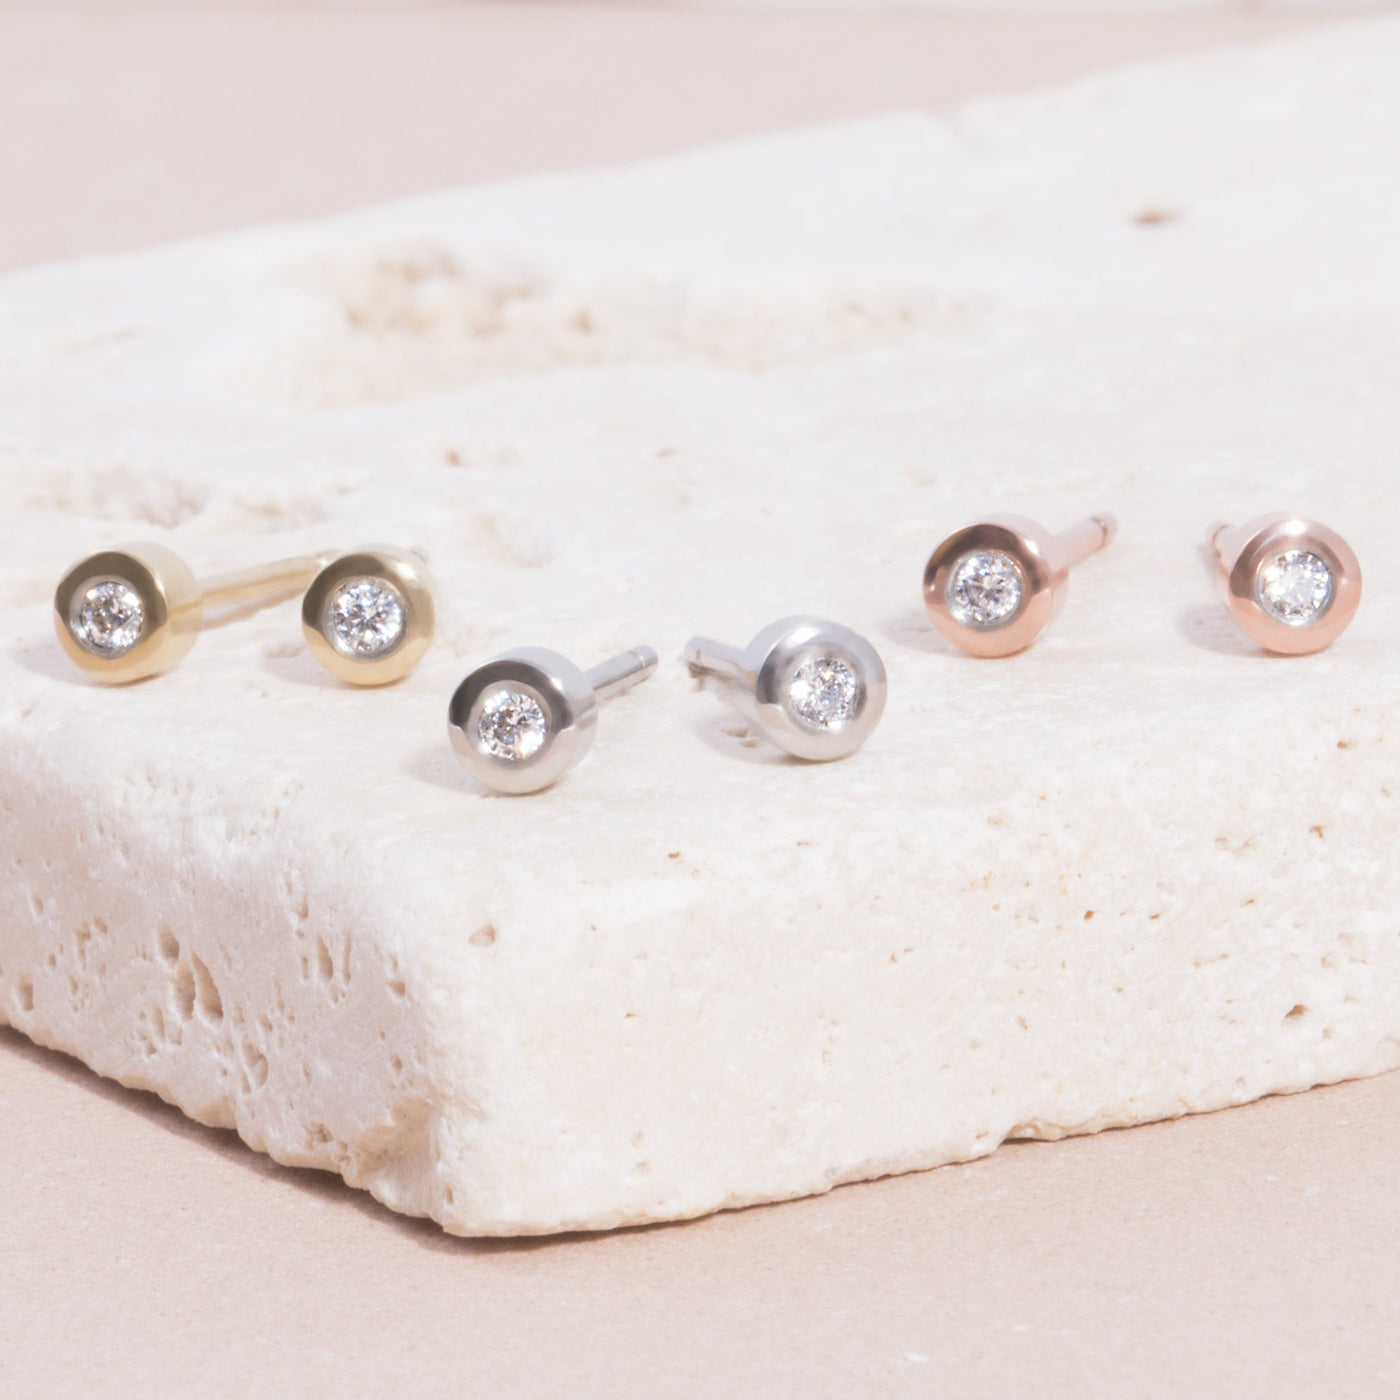 Stainless 3mm round stone stud earrings by Mia Bijoux